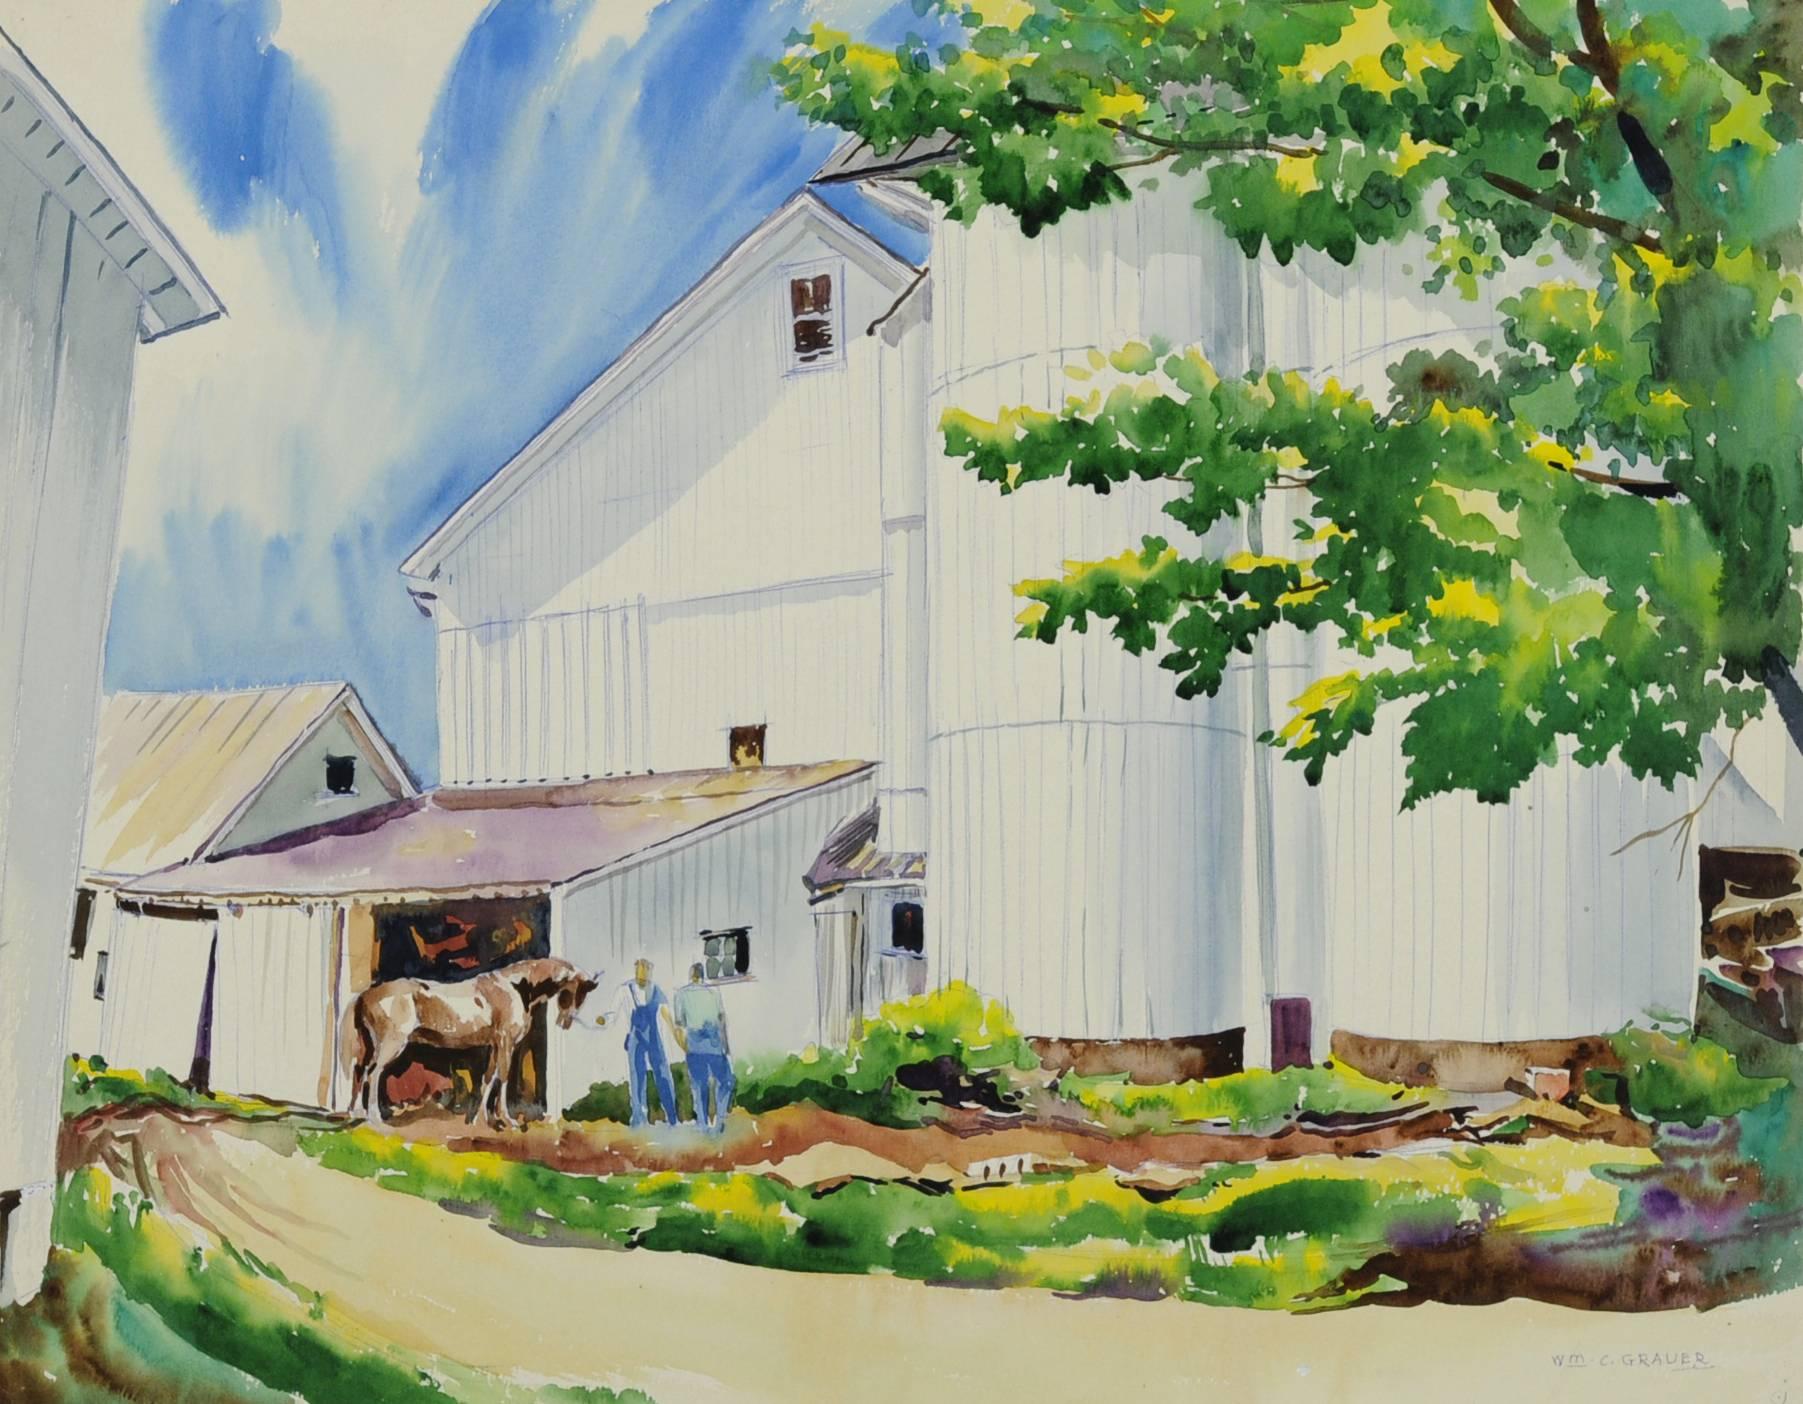 William Grauer Landscape Art - untitled (The White Barn with Farmers and Horse)